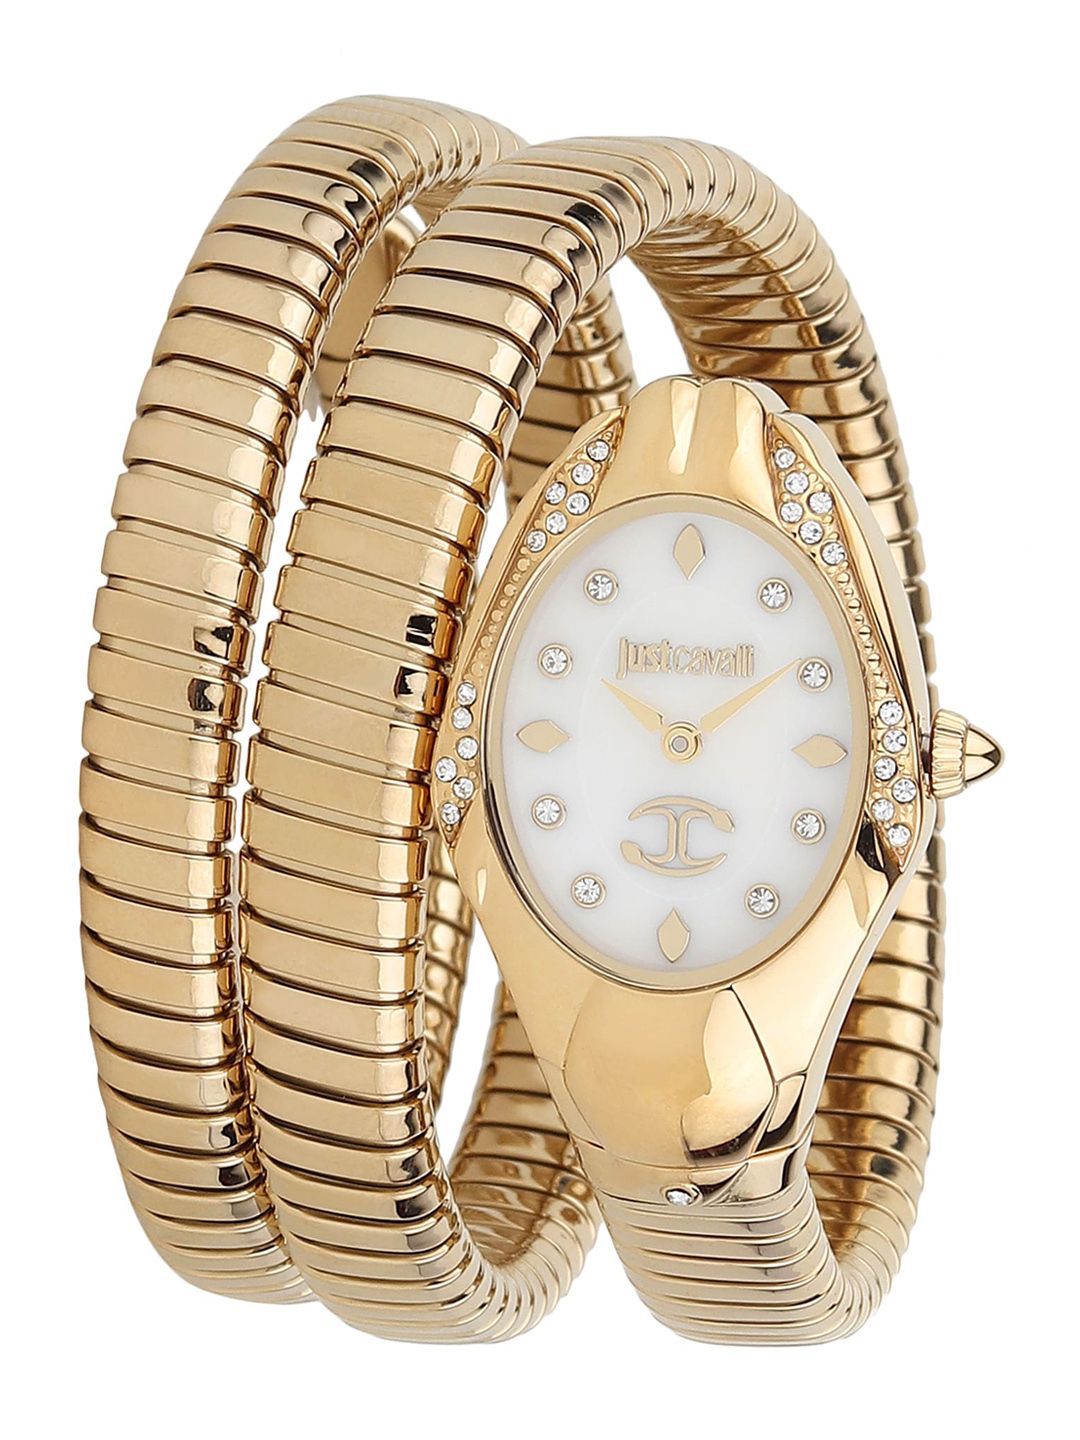 Just Cavalli Women White Dial & Gold Toned Wrap Around Straps Analogue Watch JC1L185M0015 Price in India